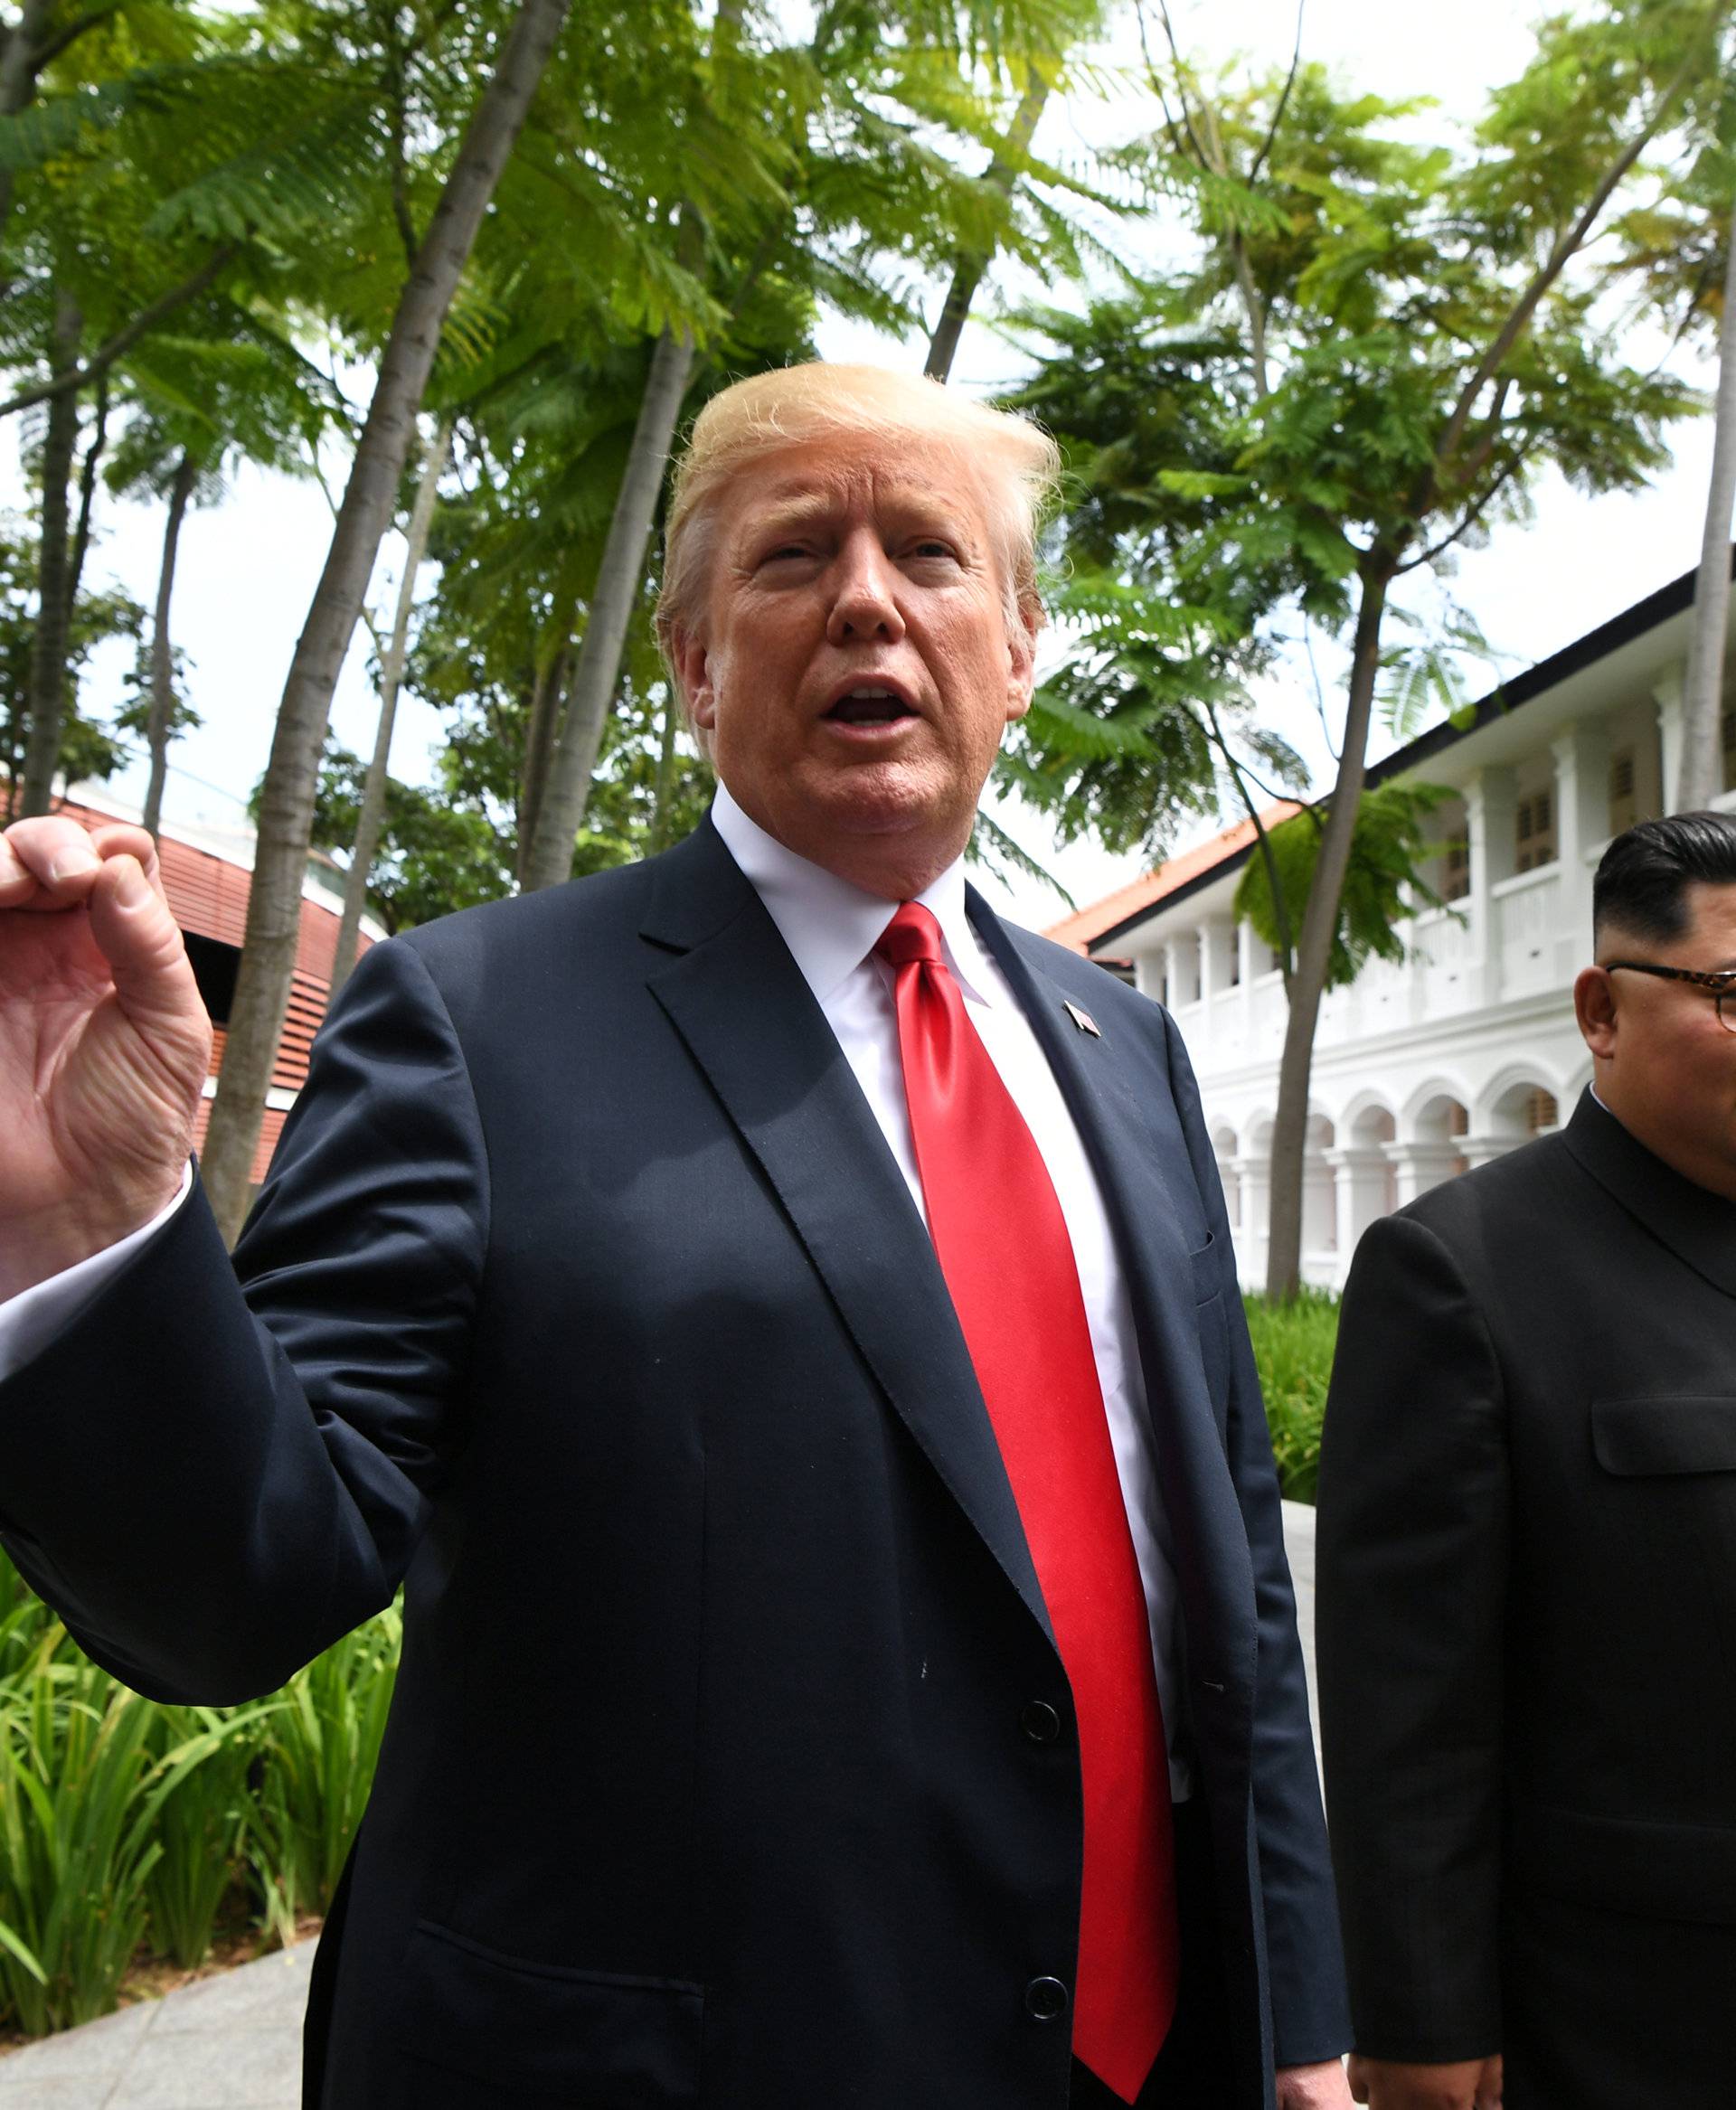 U.S. President Donald Trump gestures as he walks with North Korean leader Kim Jong Un in the Capella Hotel after their working lunch, on Sentosa island in Singapore